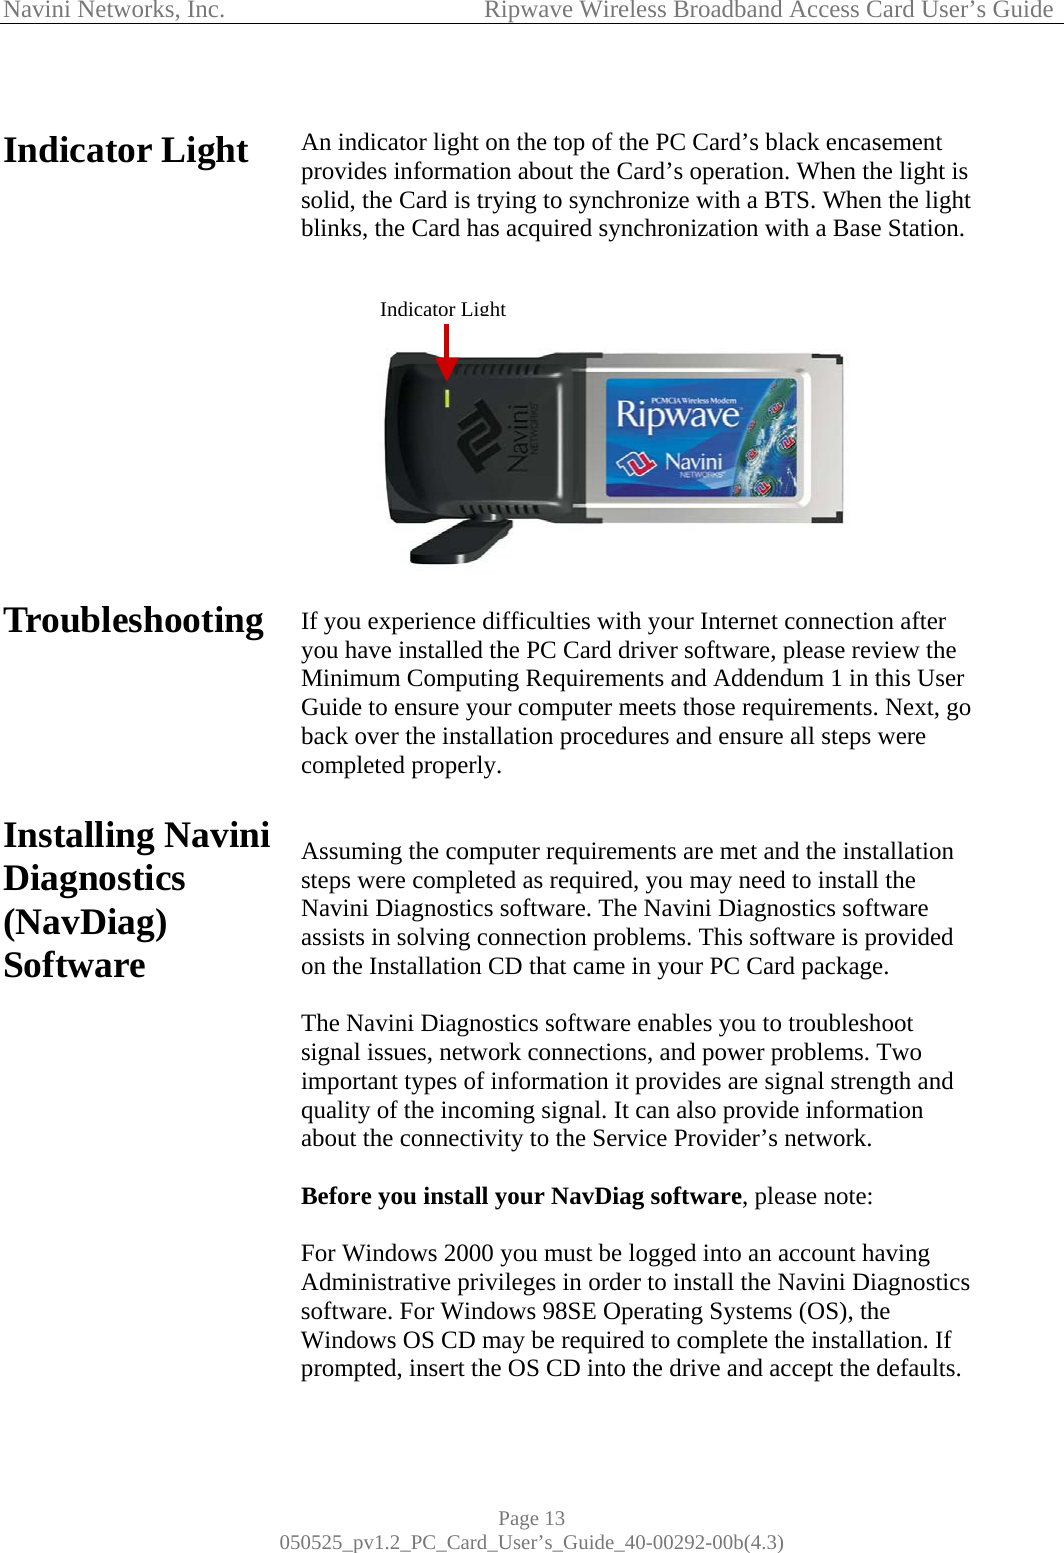 Navini Networks, Inc.            Ripwave Wireless Broadband Access Card User’s Guide Page 13 050525_pv1.2_PC_Card_User’s_Guide_40-00292-00b(4.3)  Indicator Light                Troubleshooting       Installing Navini Diagnostics (NavDiag) Software                  An indicator light on the top of the PC Card’s black encasement provides information about the Card’s operation. When the light is solid, the Card is trying to synchronize with a BTS. When the light blinks, the Card has acquired synchronization with a Base Station.   If you experience difficulties with your Internet connection after you have installed the PC Card driver software, please review the Minimum Computing Requirements and Addendum 1 in this User Guide to ensure your computer meets those requirements. Next, go back over the installation procedures and ensure all steps were completed properly.   Assuming the computer requirements are met and the installation steps were completed as required, you may need to install the Navini Diagnostics software. The Navini Diagnostics software assists in solving connection problems. This software is provided on the Installation CD that came in your PC Card package.  The Navini Diagnostics software enables you to troubleshoot signal issues, network connections, and power problems. Two important types of information it provides are signal strength and quality of the incoming signal. It can also provide information about the connectivity to the Service Provider’s network.   Before you install your NavDiag software, please note:  For Windows 2000 you must be logged into an account having Administrative privileges in order to install the Navini Diagnostics software. For Windows 98SE Operating Systems (OS), the Windows OS CD may be required to complete the installation. If prompted, insert the OS CD into the drive and accept the defaults.  Indicator Light